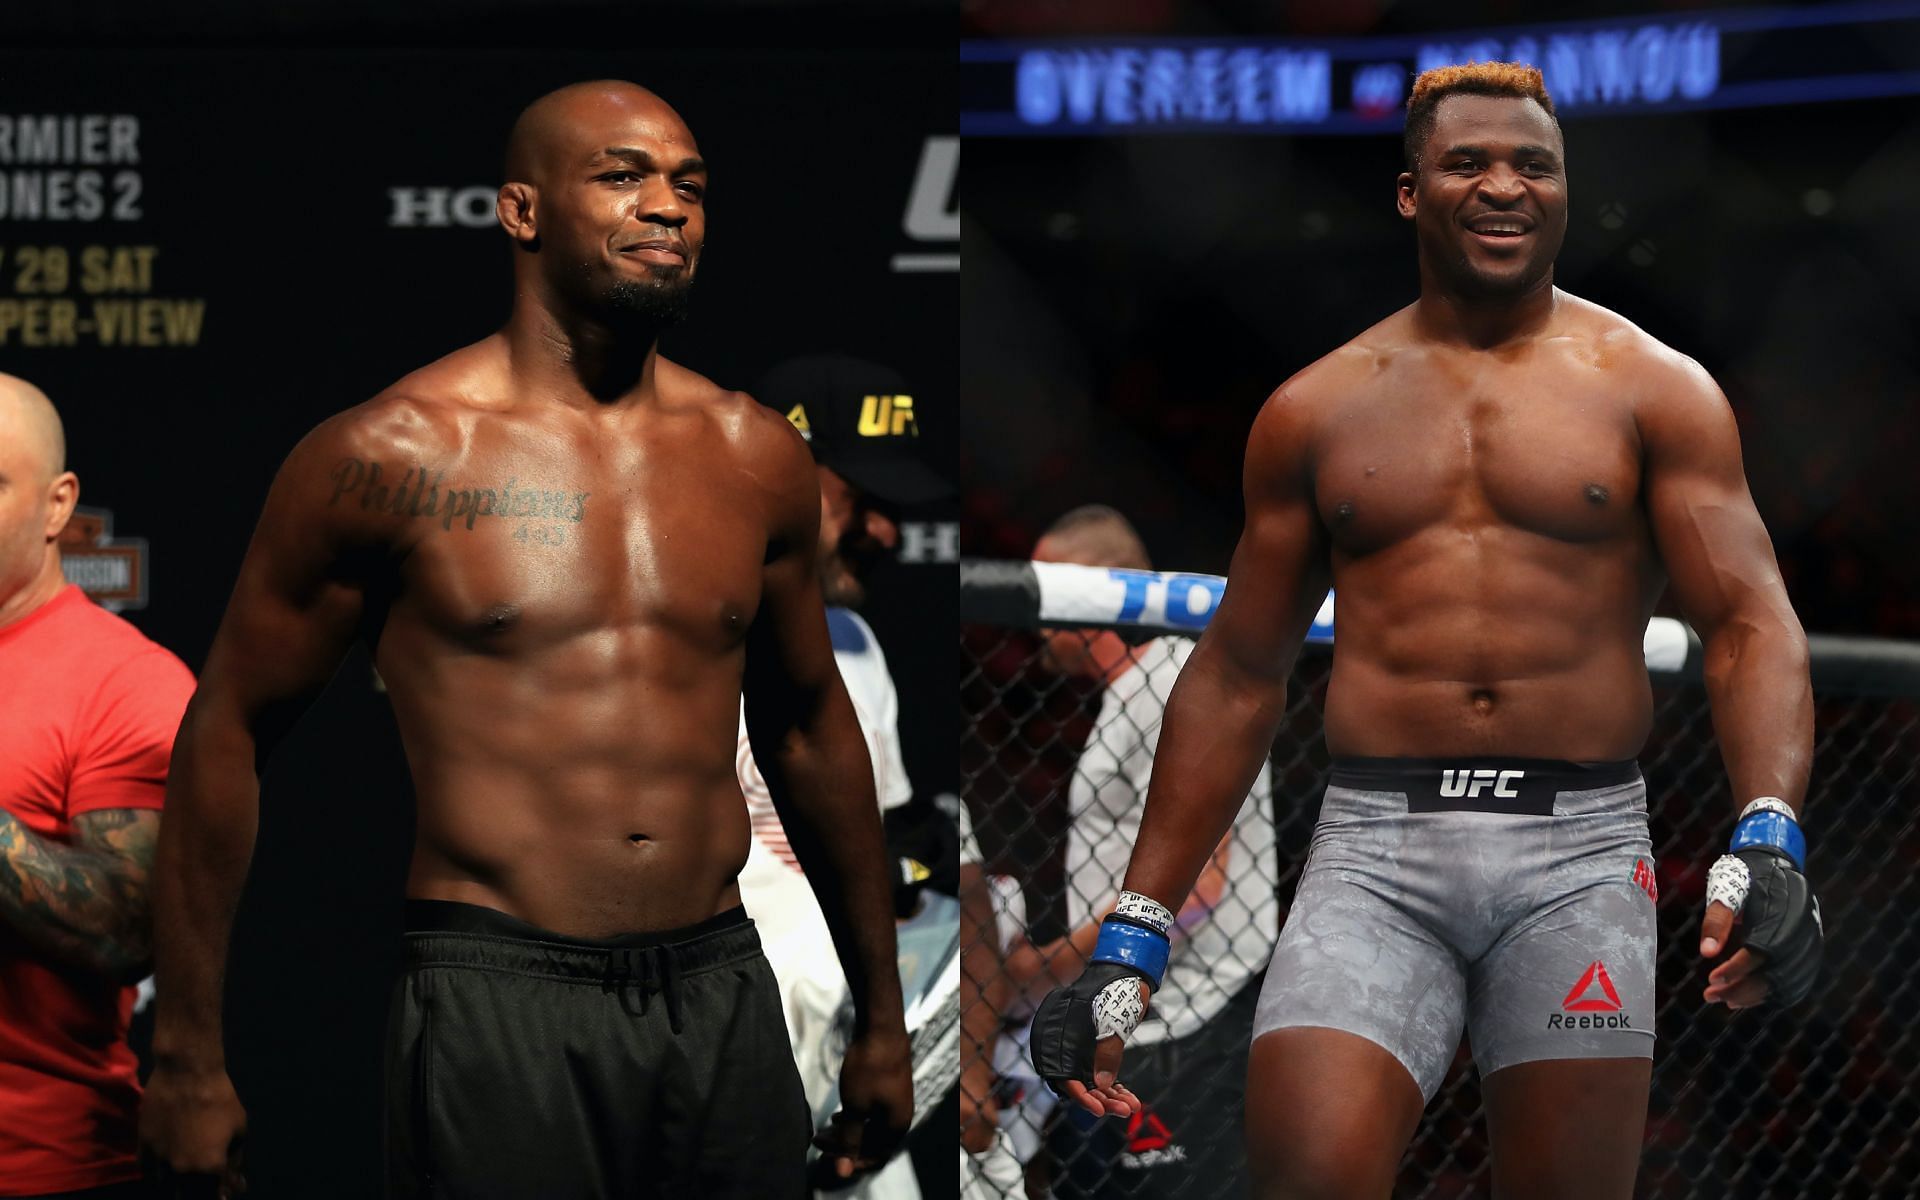 Jon Jones (left) and Francis Ngannou (right) [Image Credits: Getty Images]